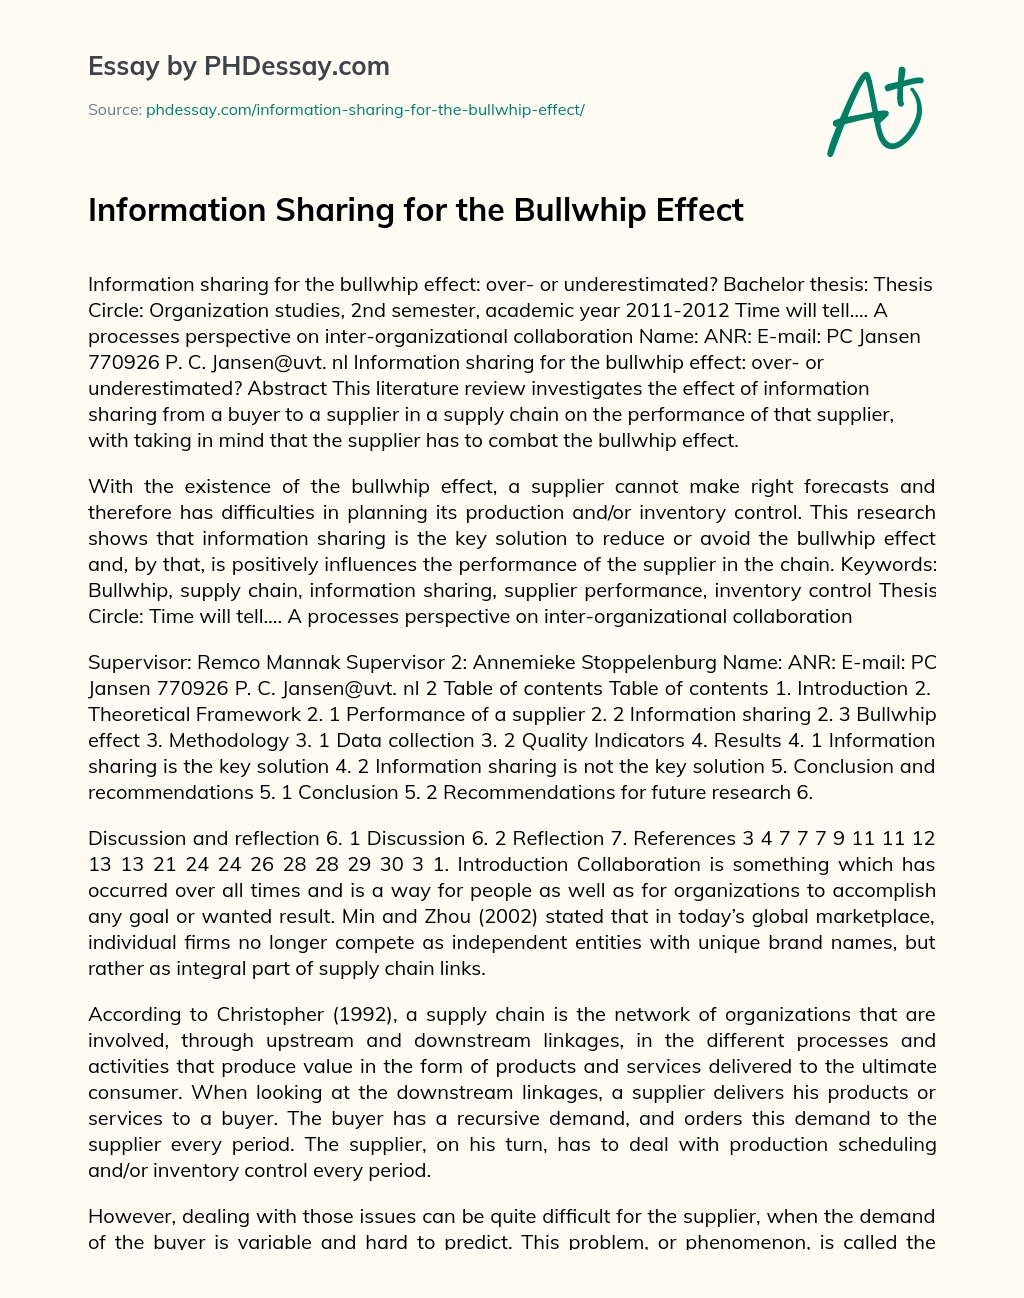 Information Sharing for the Bullwhip Effect essay